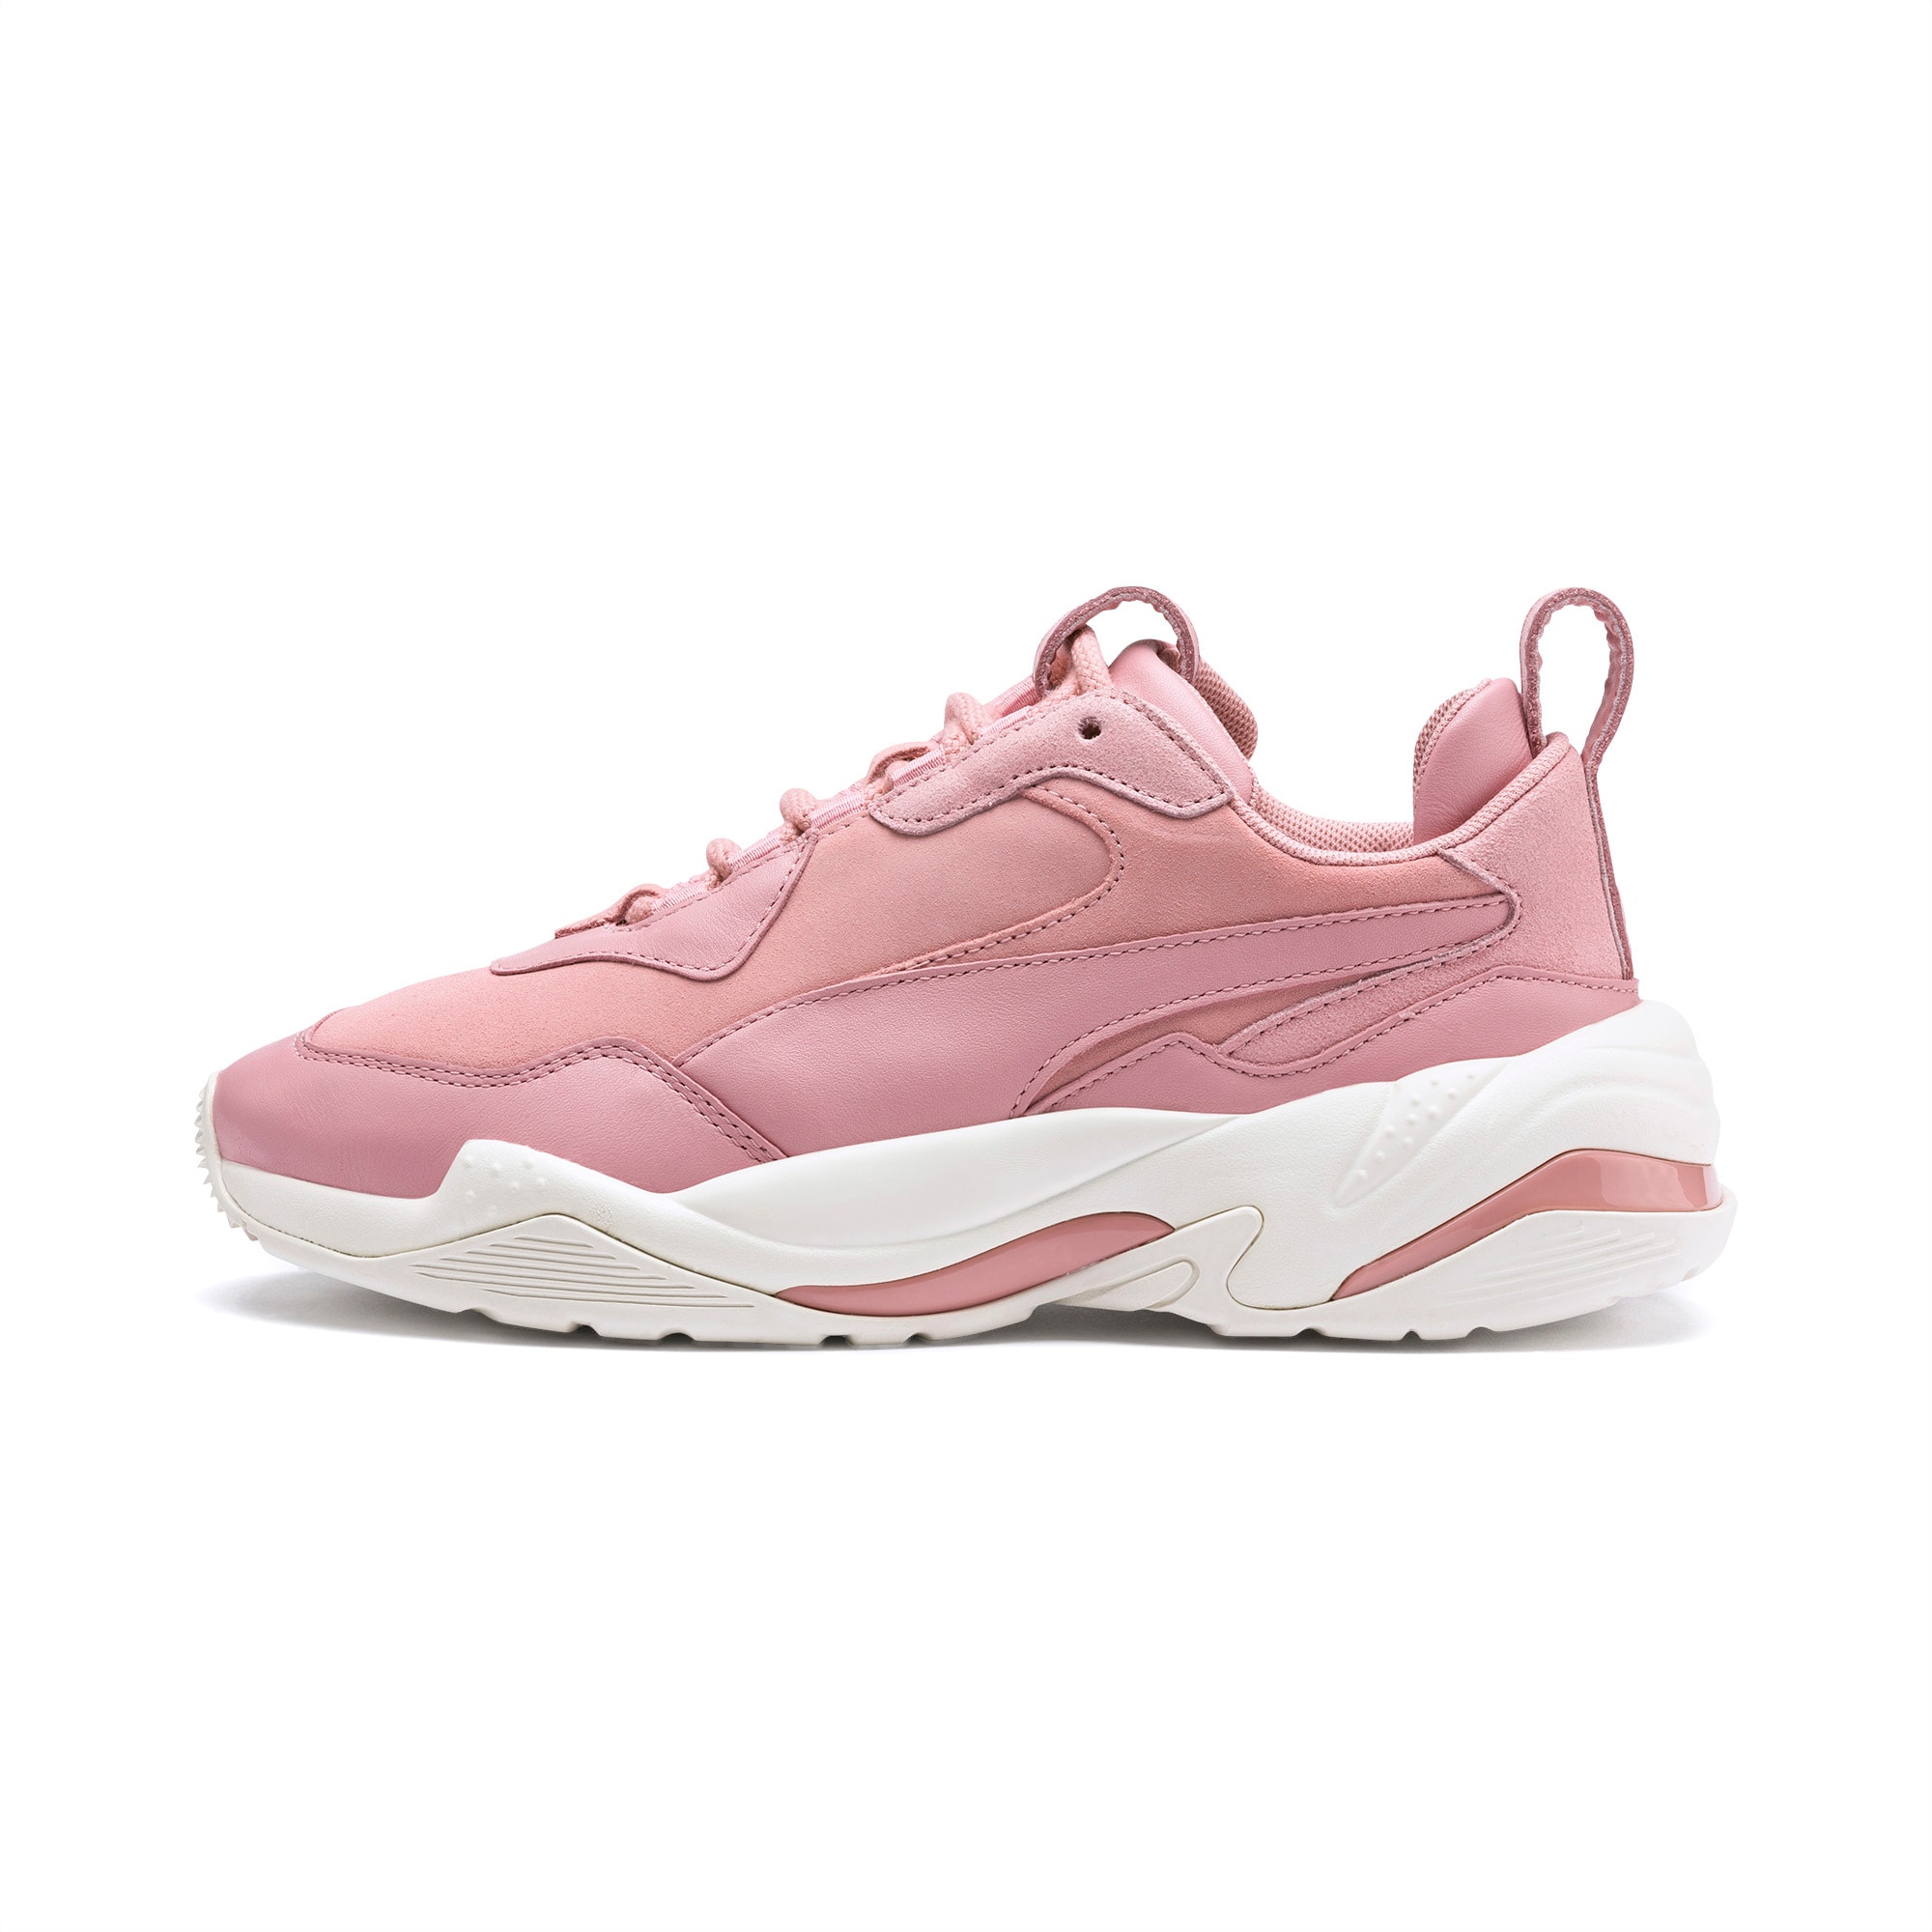 Thunder Fire Rose Women's Trainers 